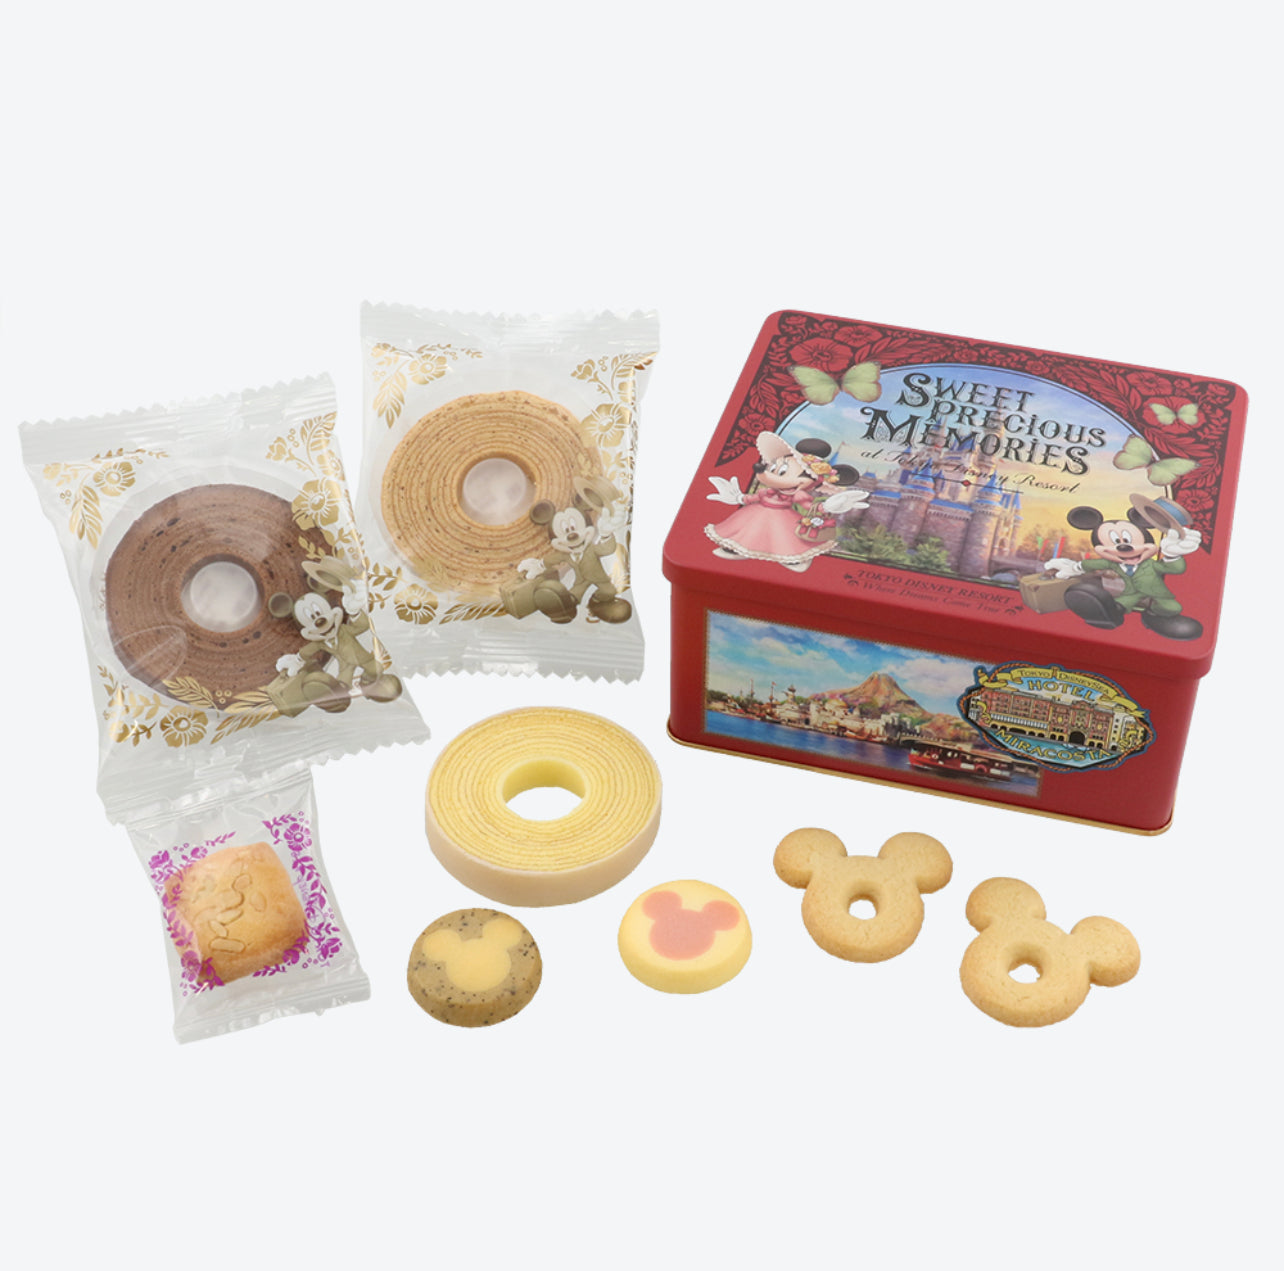 TDR Mickey & Minnie Mouse Sweet Precious Memories of Tokyo Disney Resort Assorted Sweets / Souvenirs